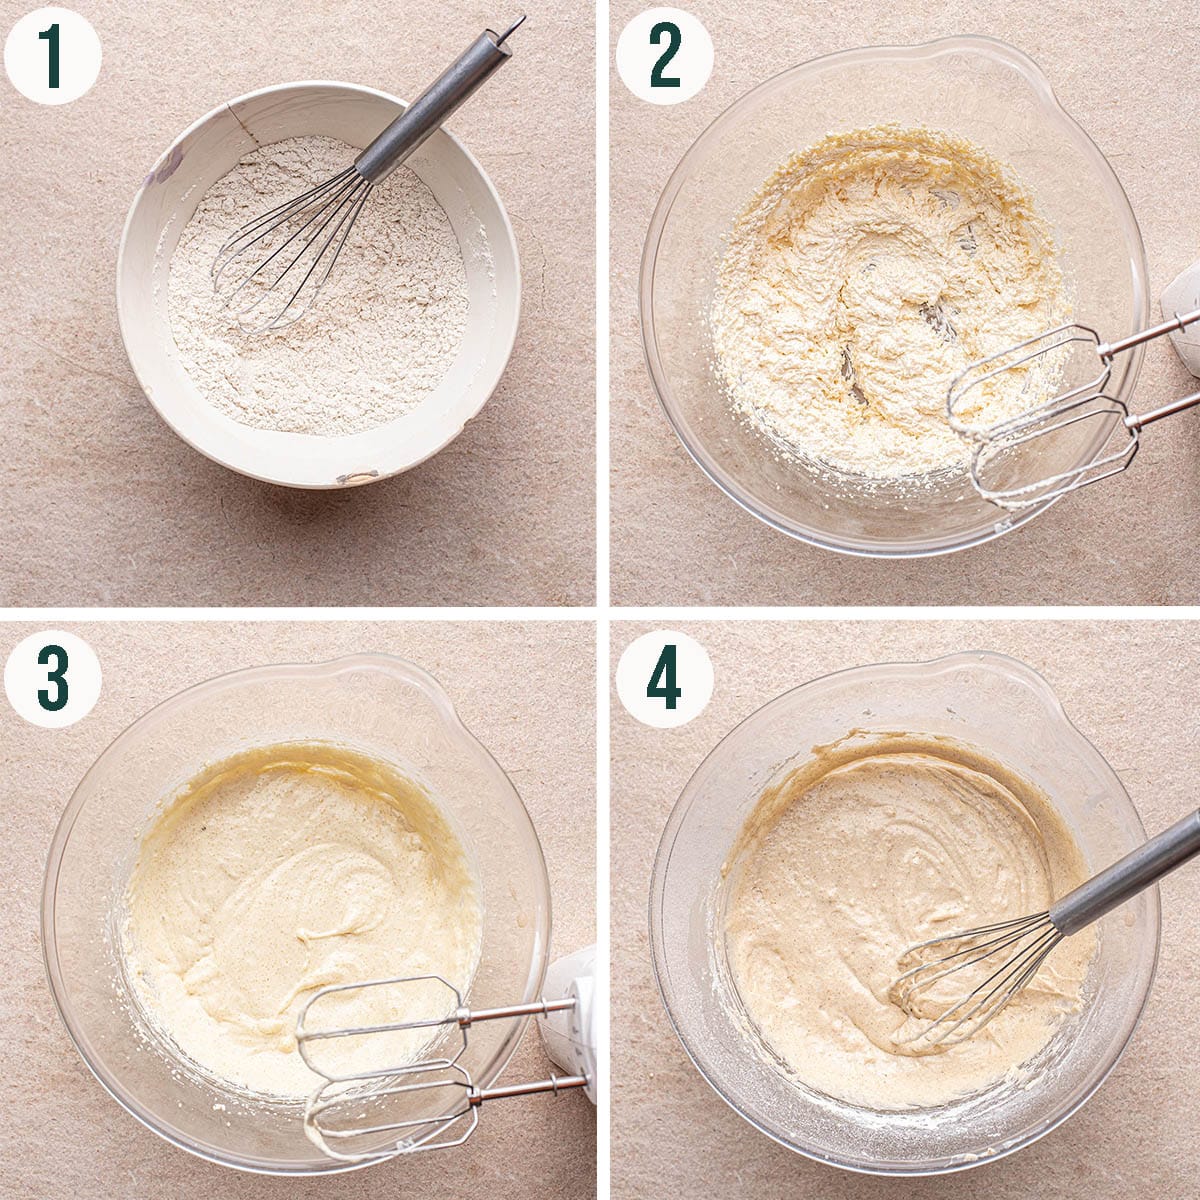 Cupcake batter steps 1 to 4, mixing the dry ingredients, beating the wet ingredients, and finished batter.